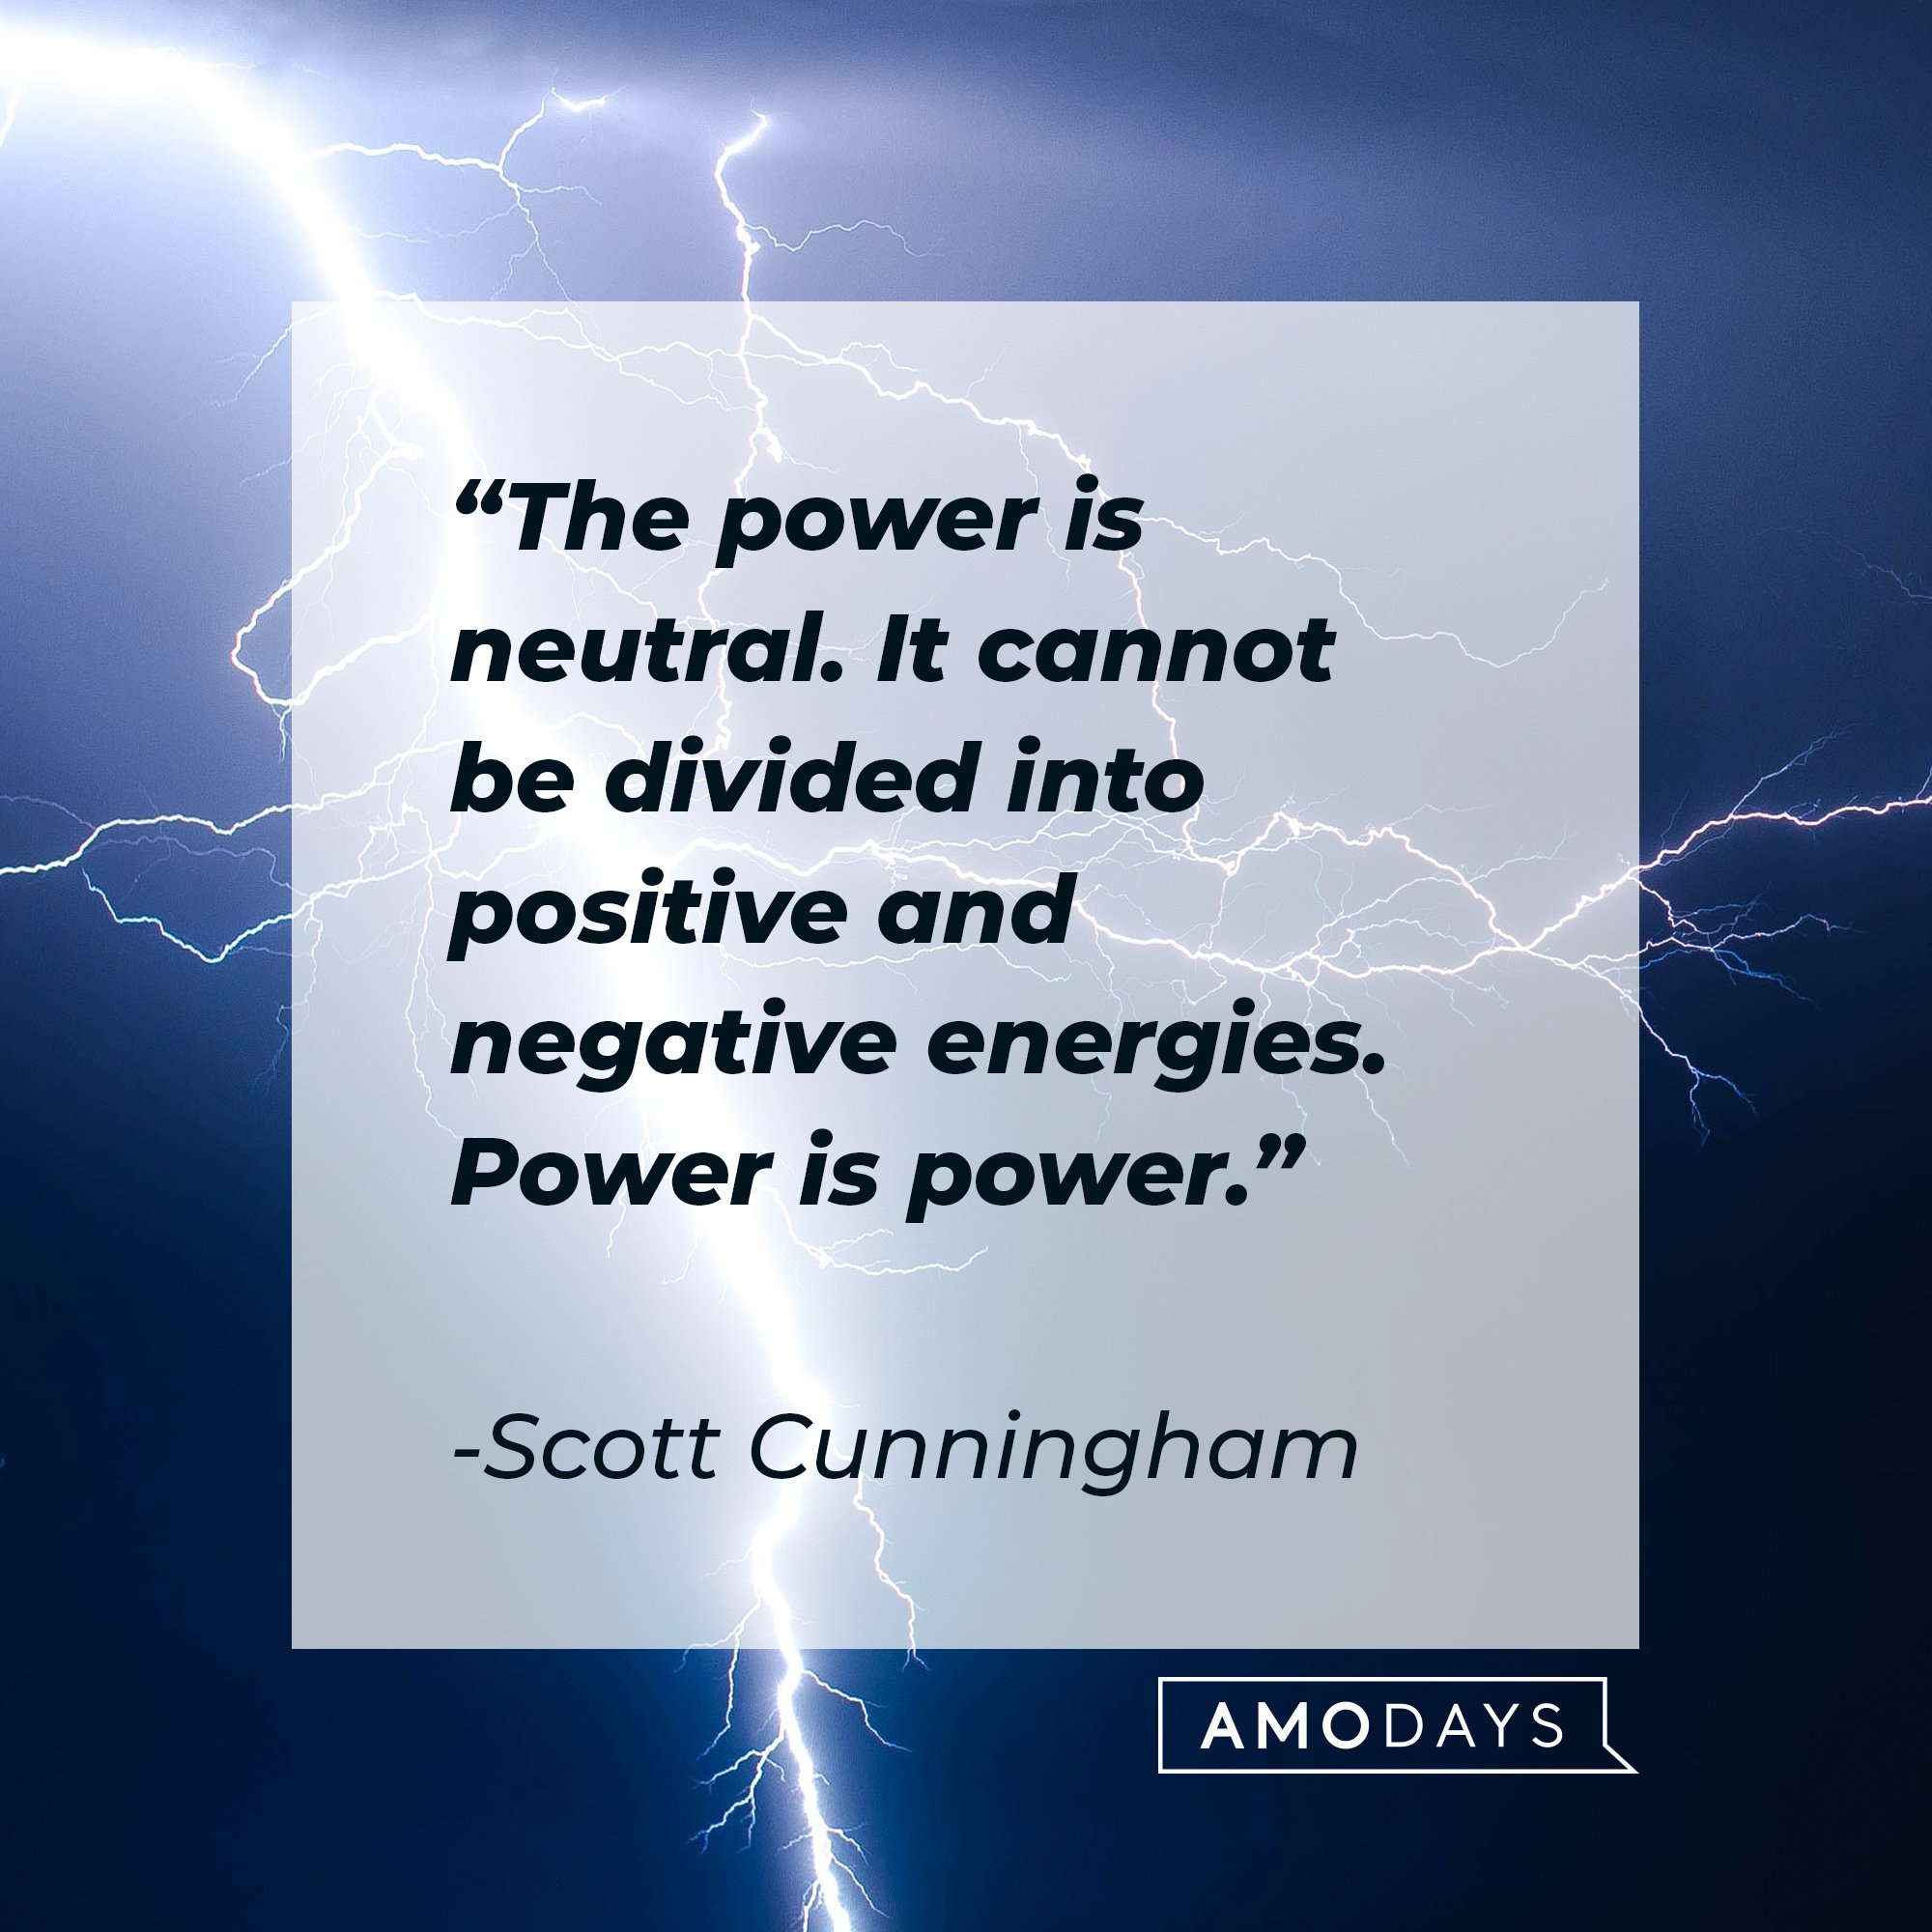 Scott Cunningham’s quote: "The power is neutral. It cannot be divided into positive and negative energies. Power is power." | Image: AmoDays 